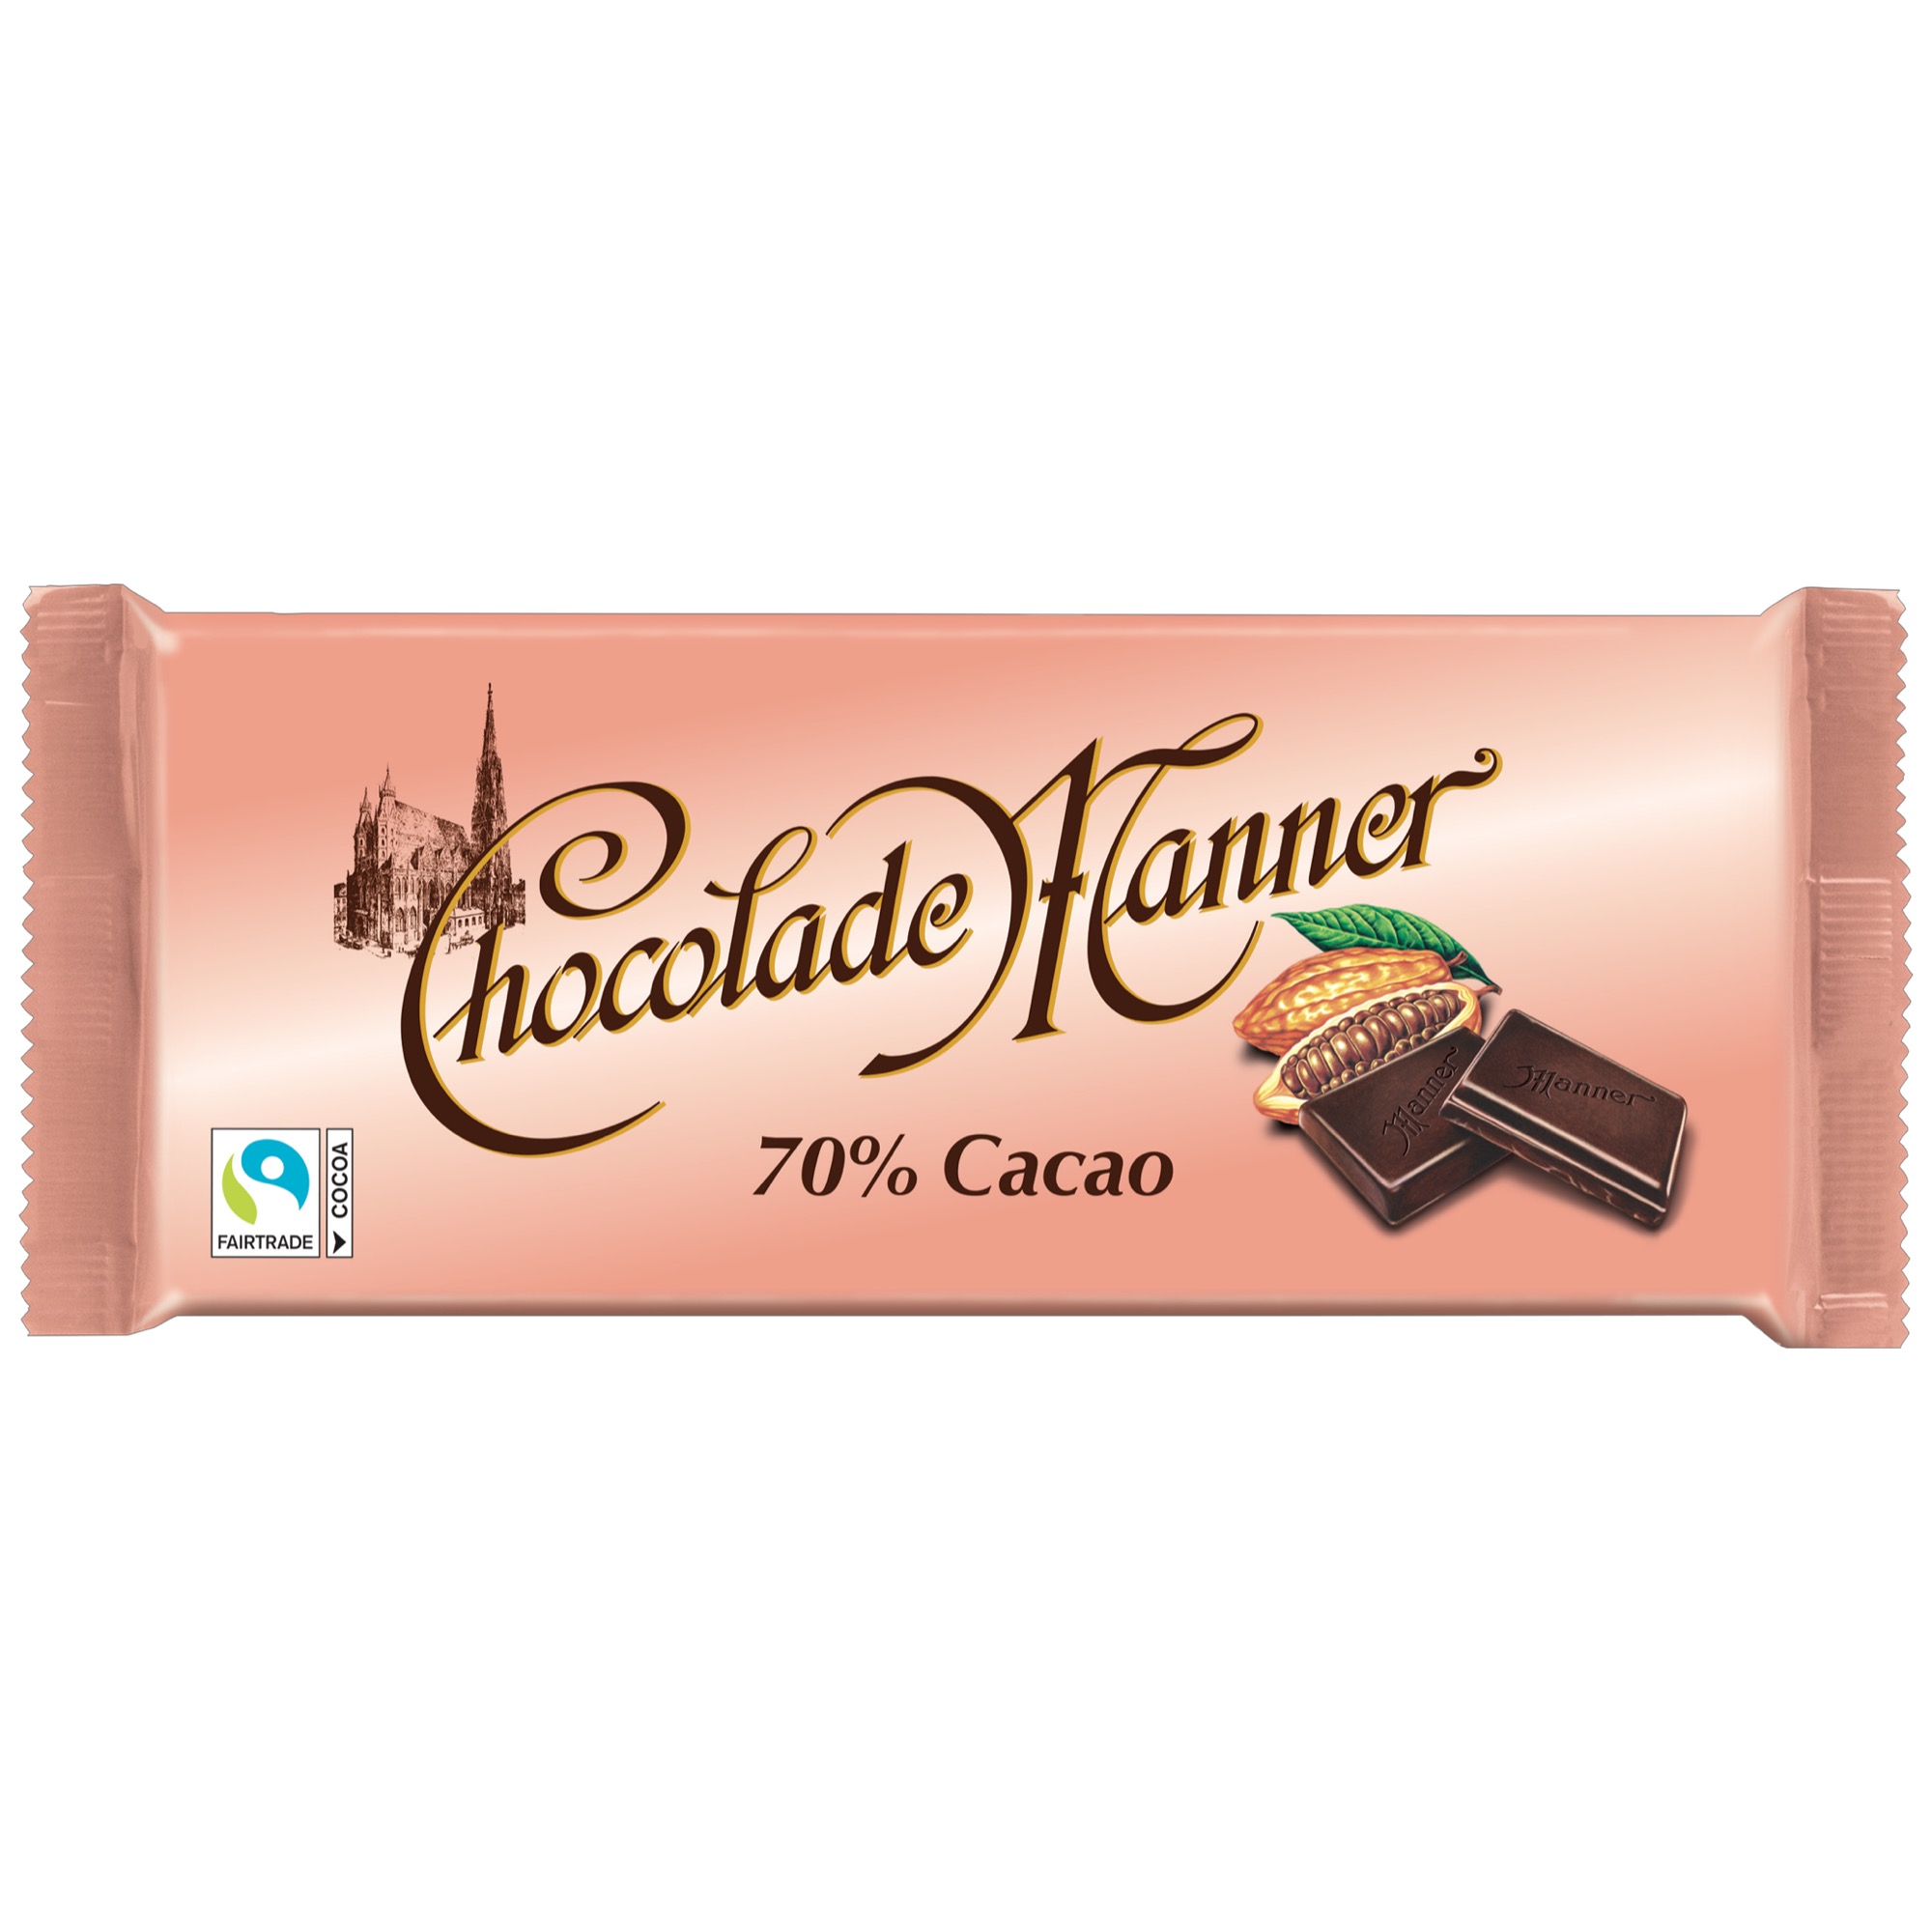 Manner Chocolade Cacao 70% 150g